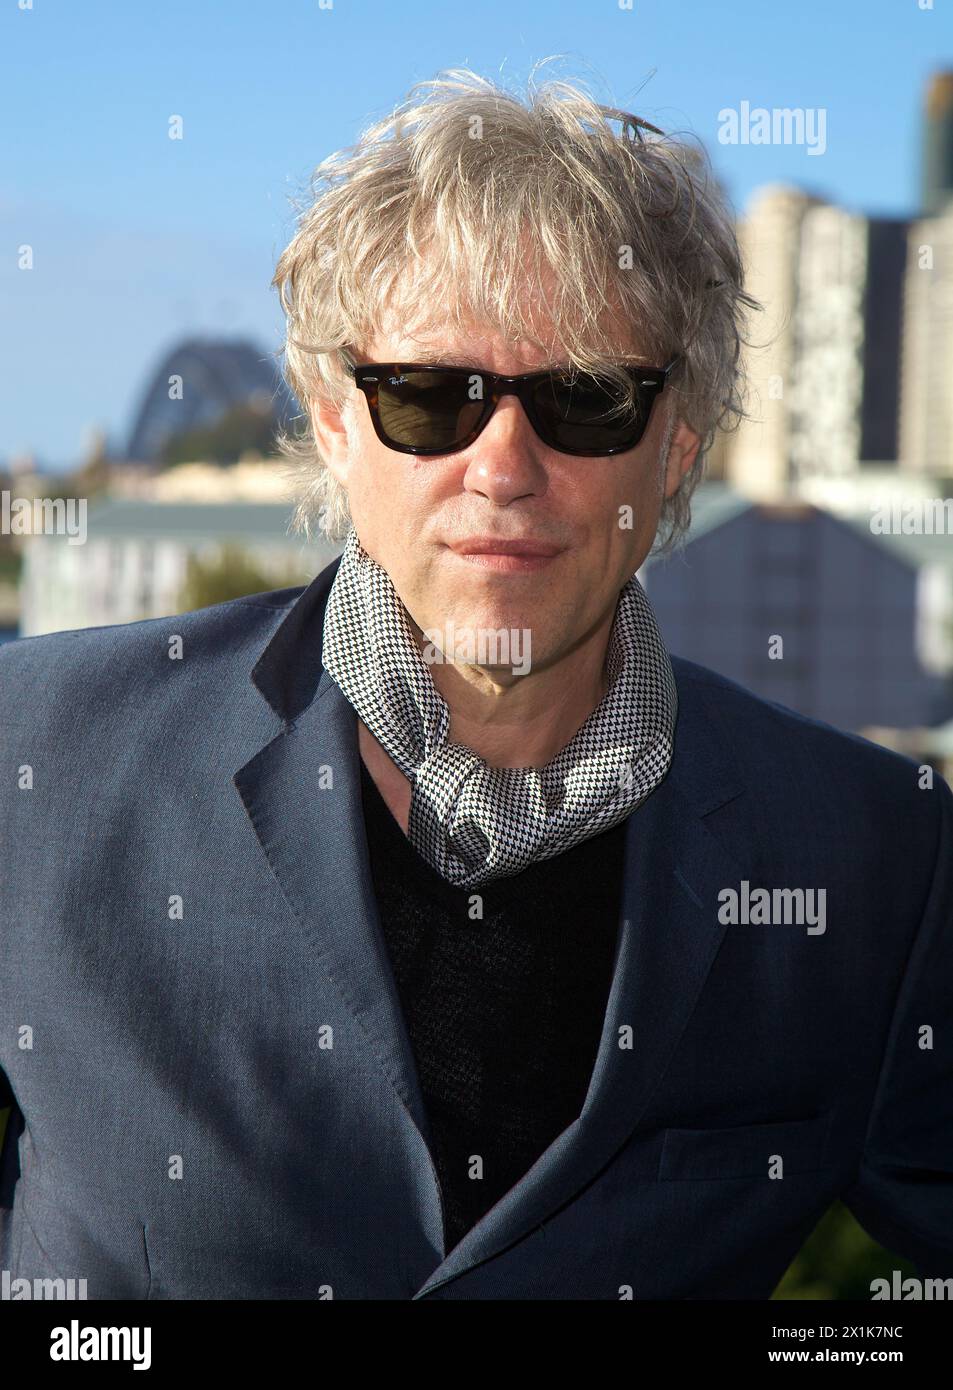 Sir Bob Geldof, Danielle Spencer & Jon Stevens were in Sydney to host a charity concert in aid of disaster response . ANZ and Star City presented the Stock Photo